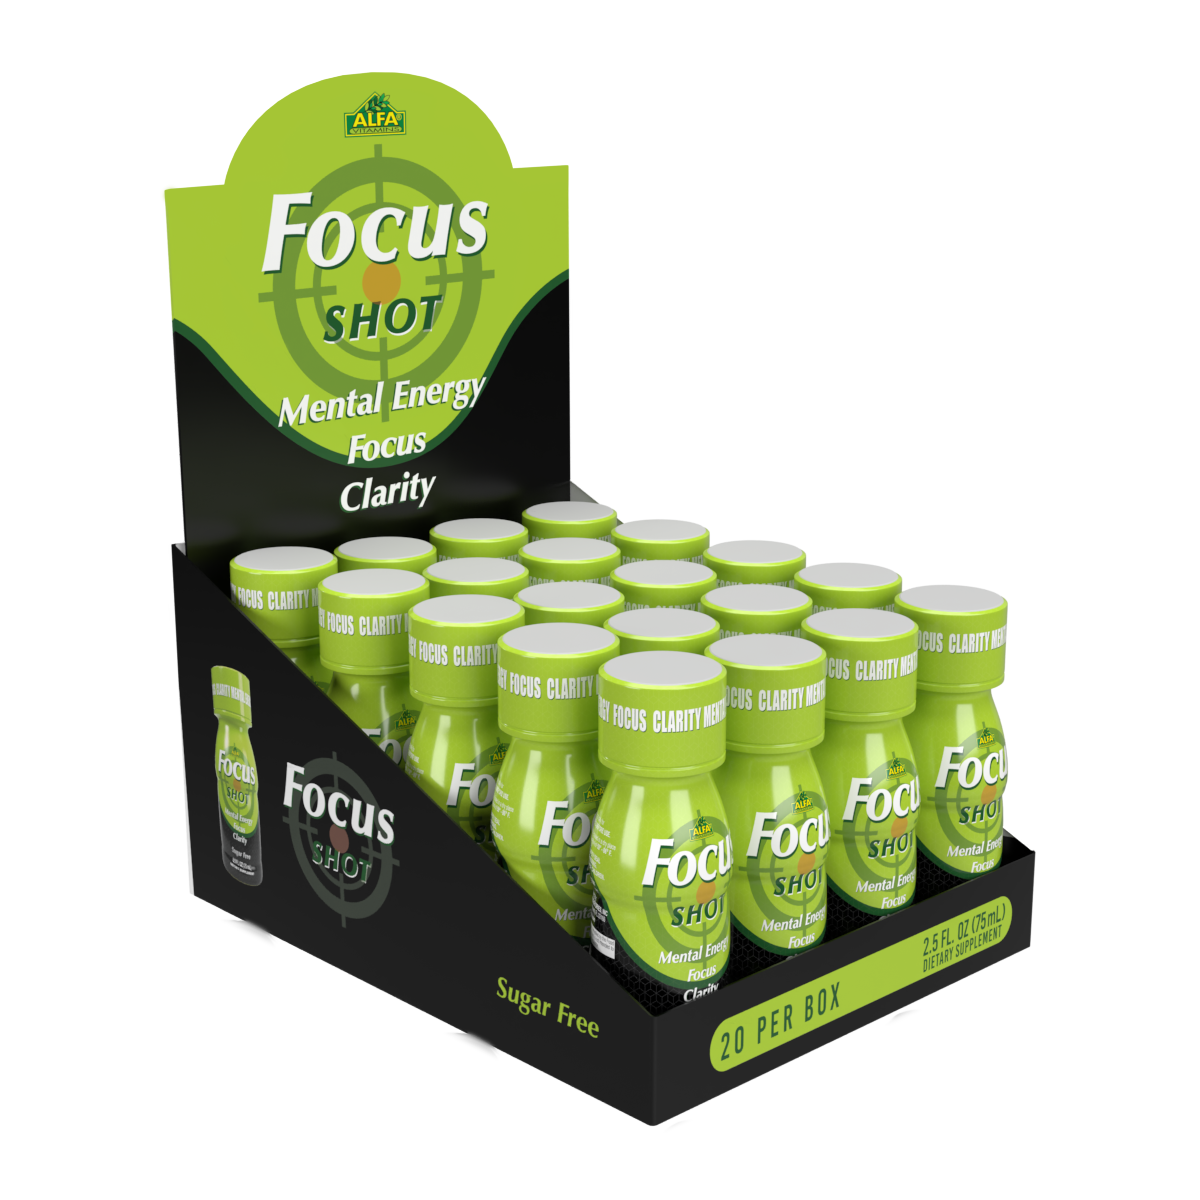 Energy boosters for mental focus